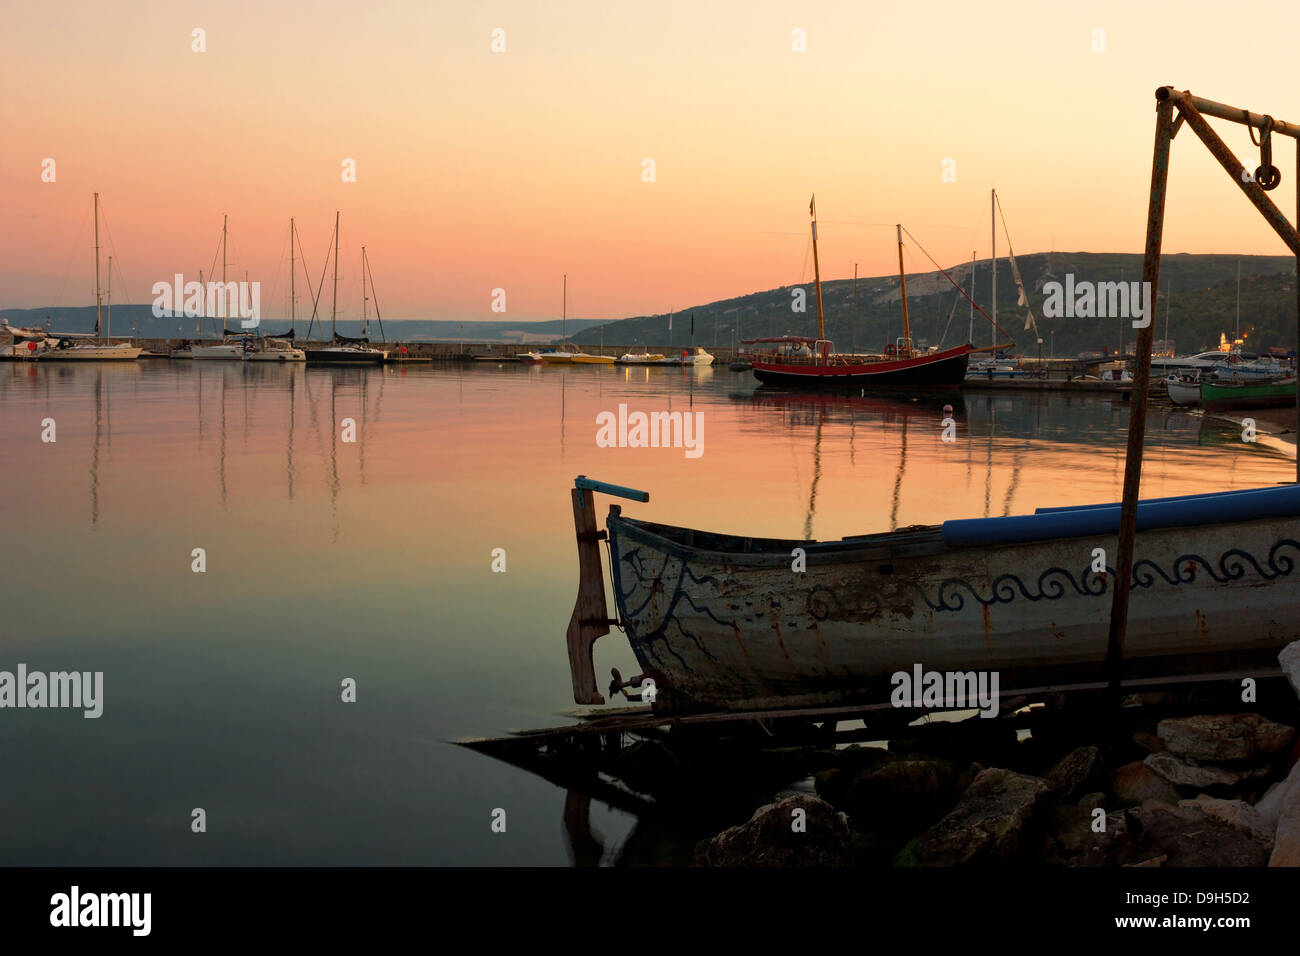 Tranquil sunset scene in a peaceful evening with fishing boats docked in the harbor. Northern Bulgarian Black Sea coast. Stock Photo